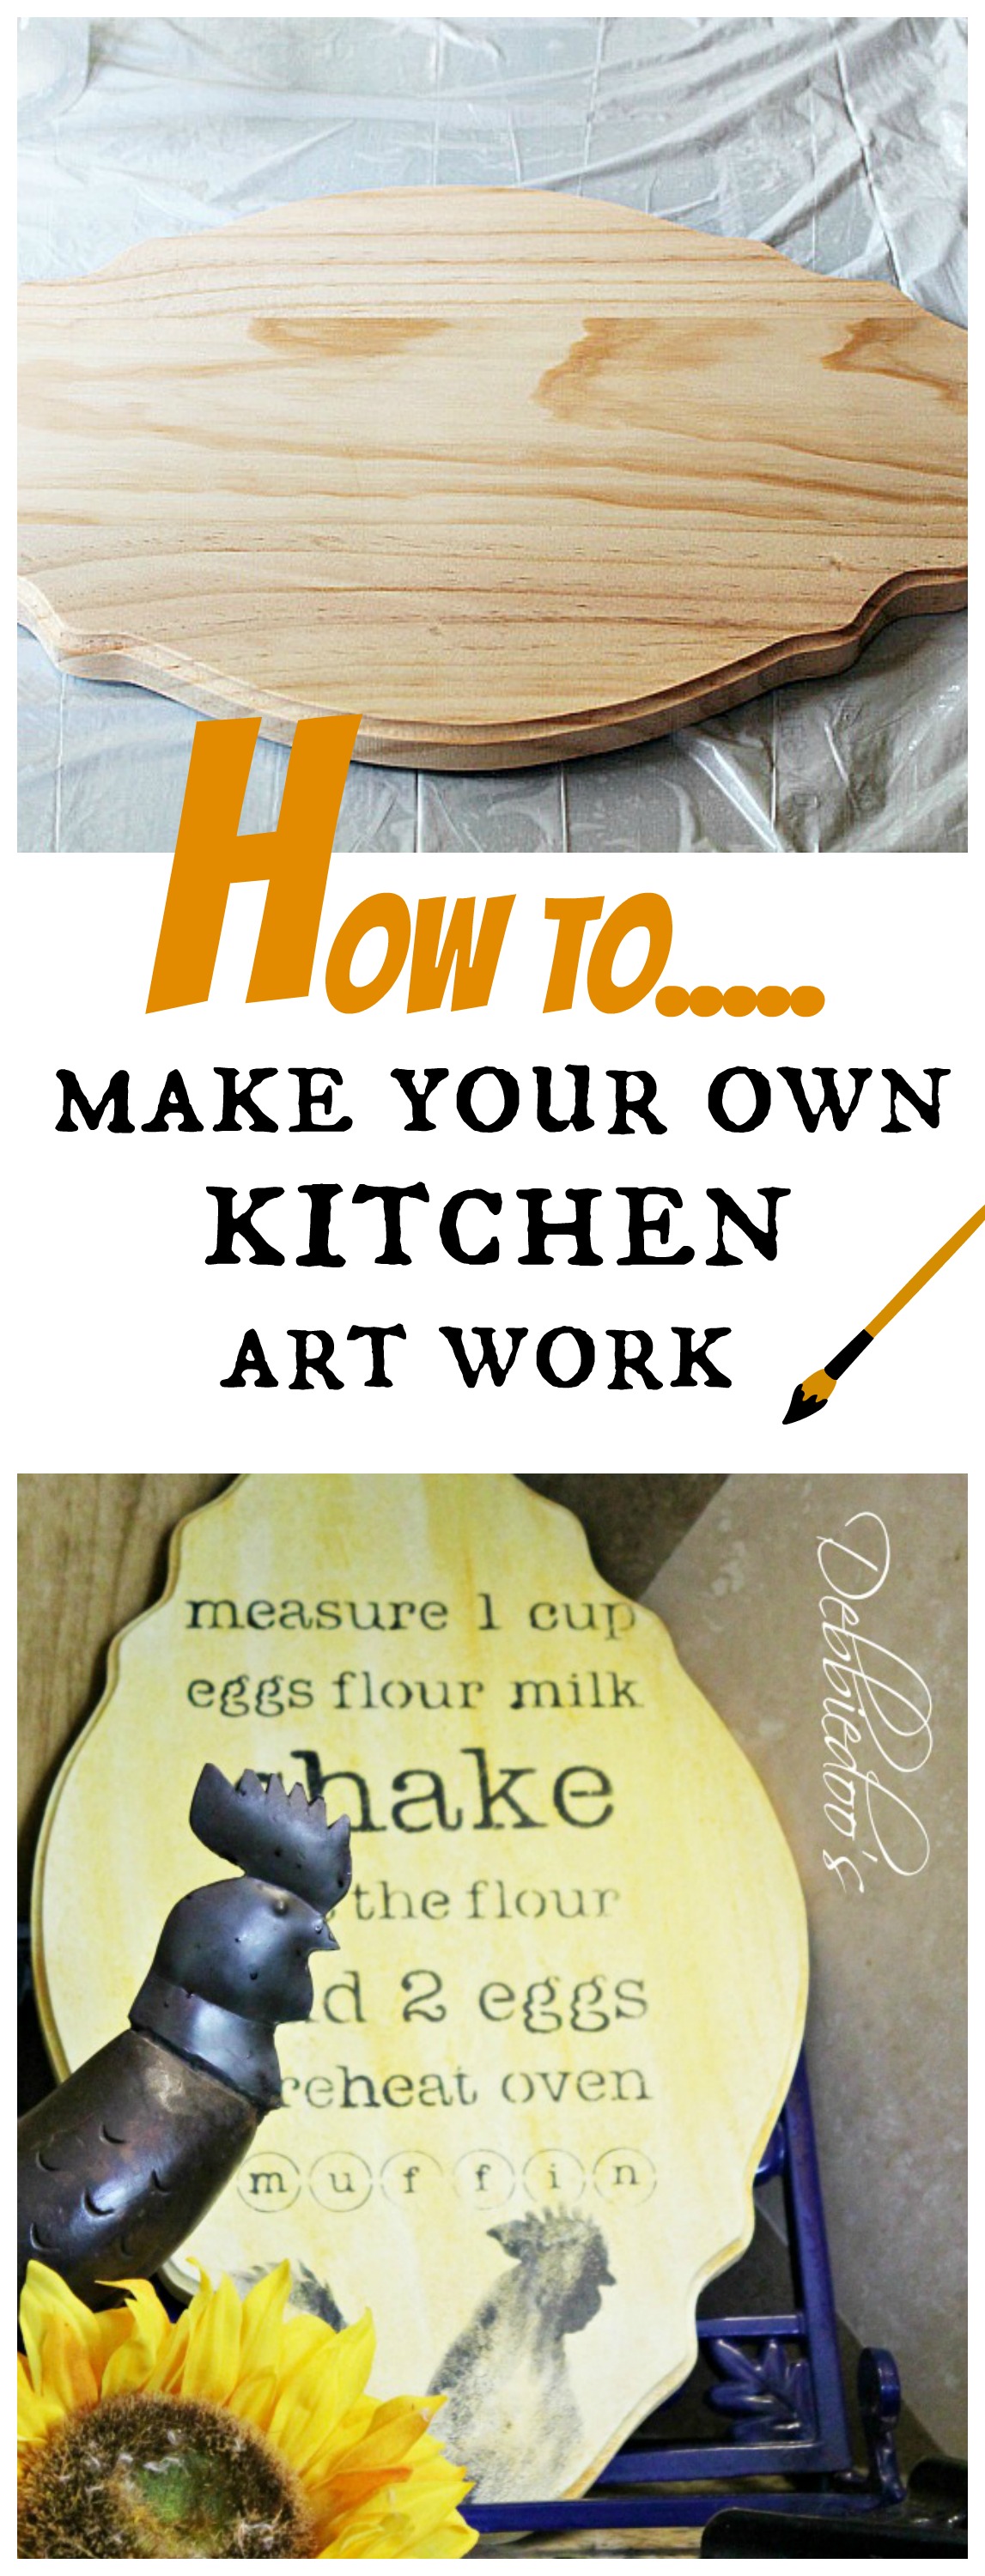 How to make your own kitchen art work for less than $5.00